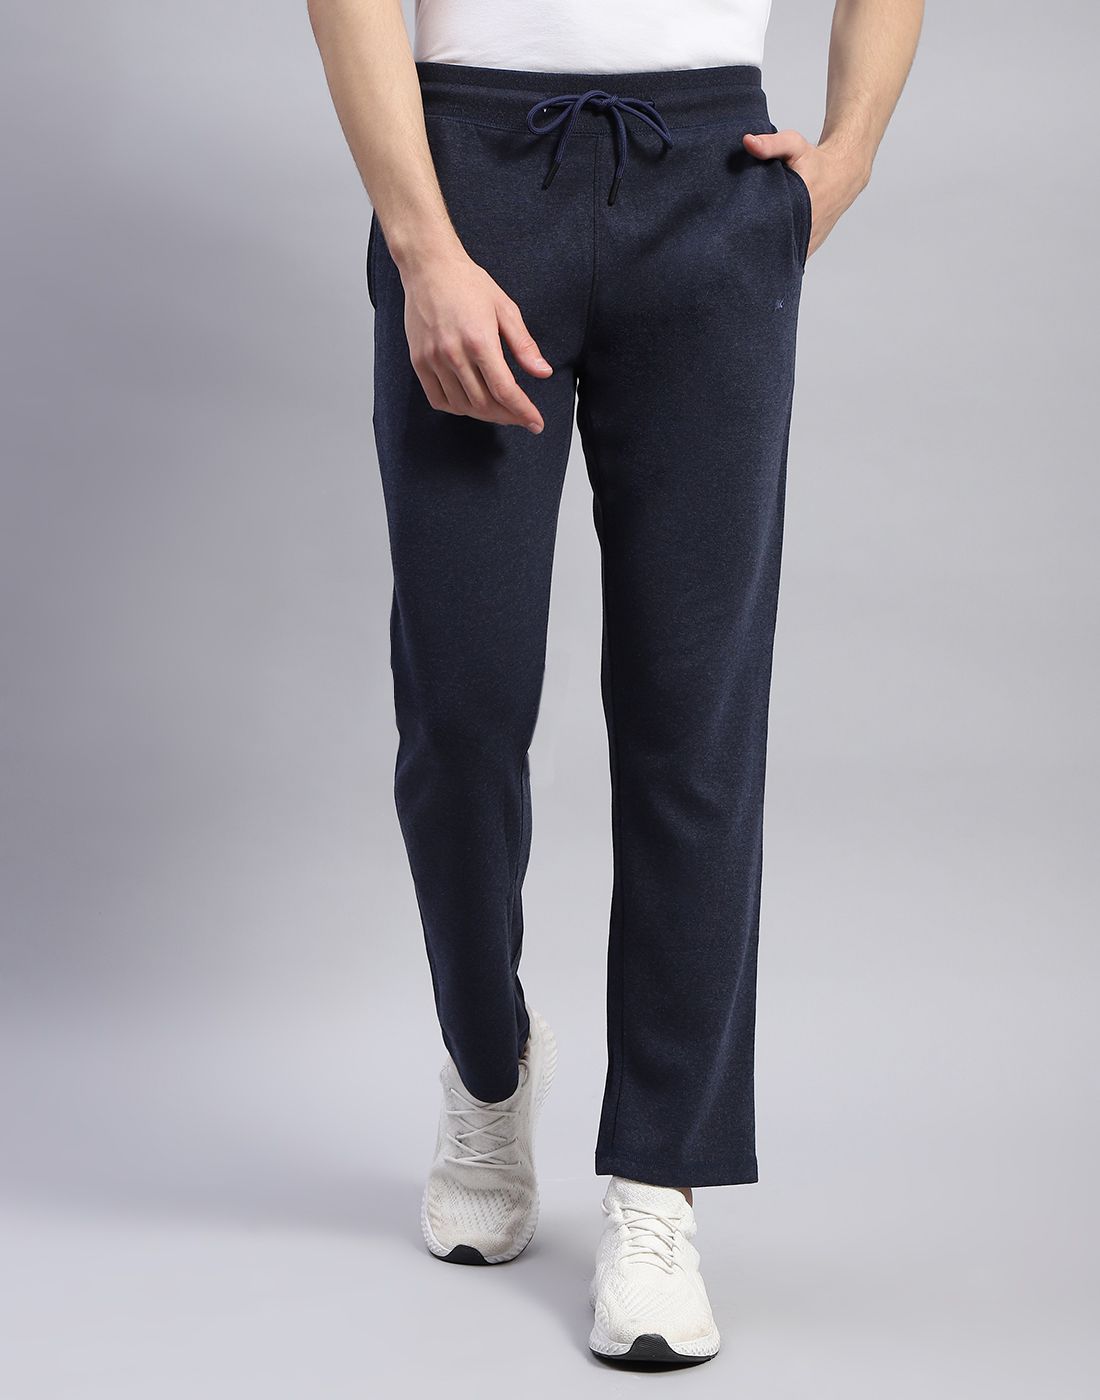     			Monte Carlo Navy Blue Cotton Blend Men's Trackpants ( Pack of 1 )